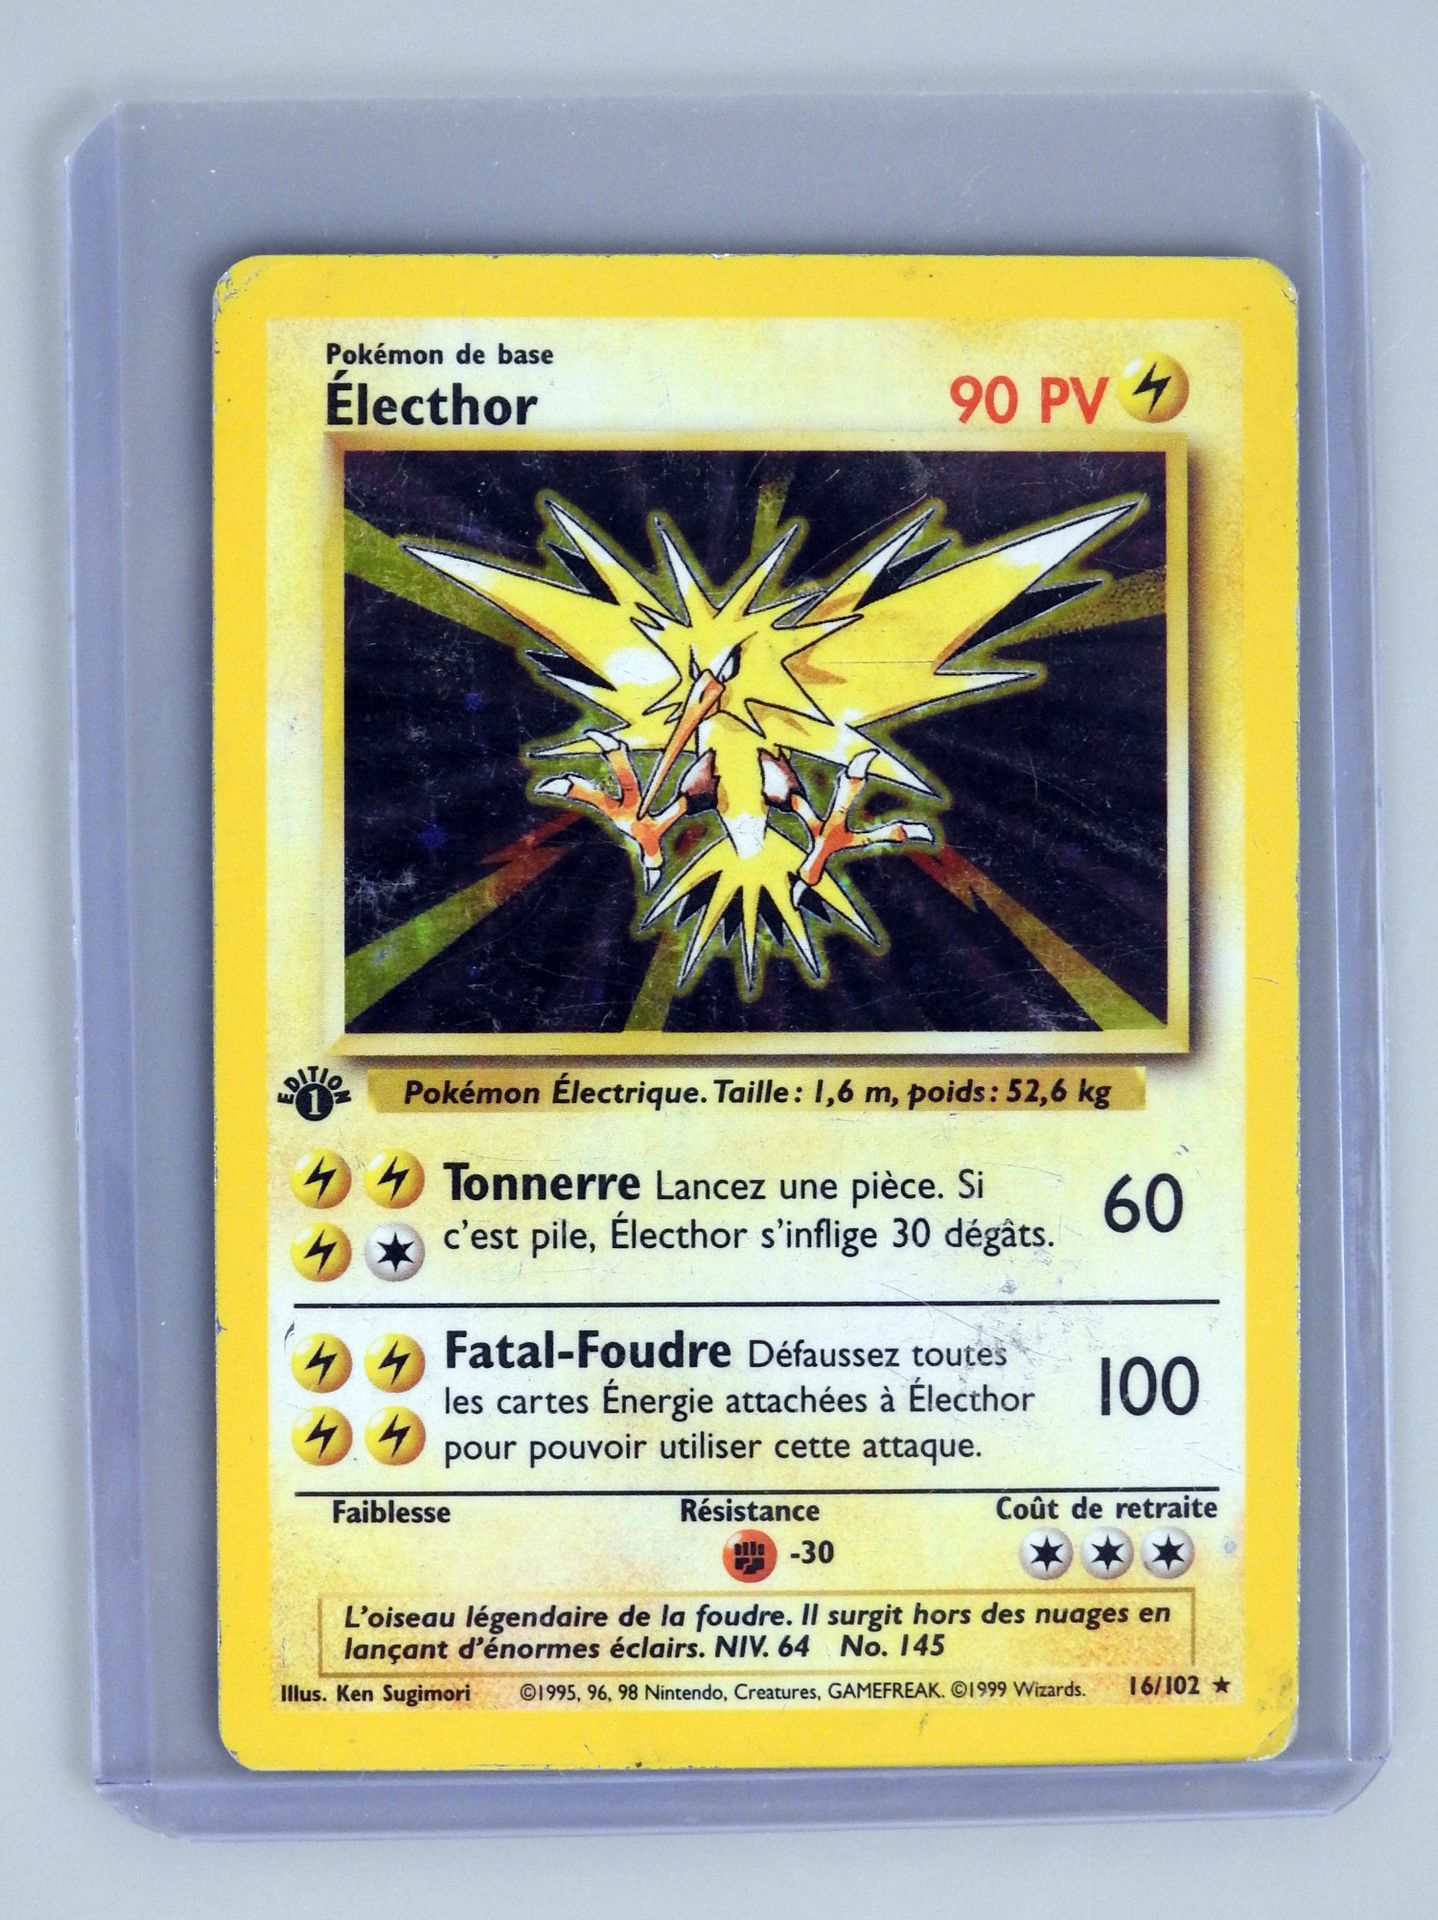 Null ELECTHOR Ed 1

Wizards Block Basic Set 16/102

Pokemon card with rubbing, s&hellip;